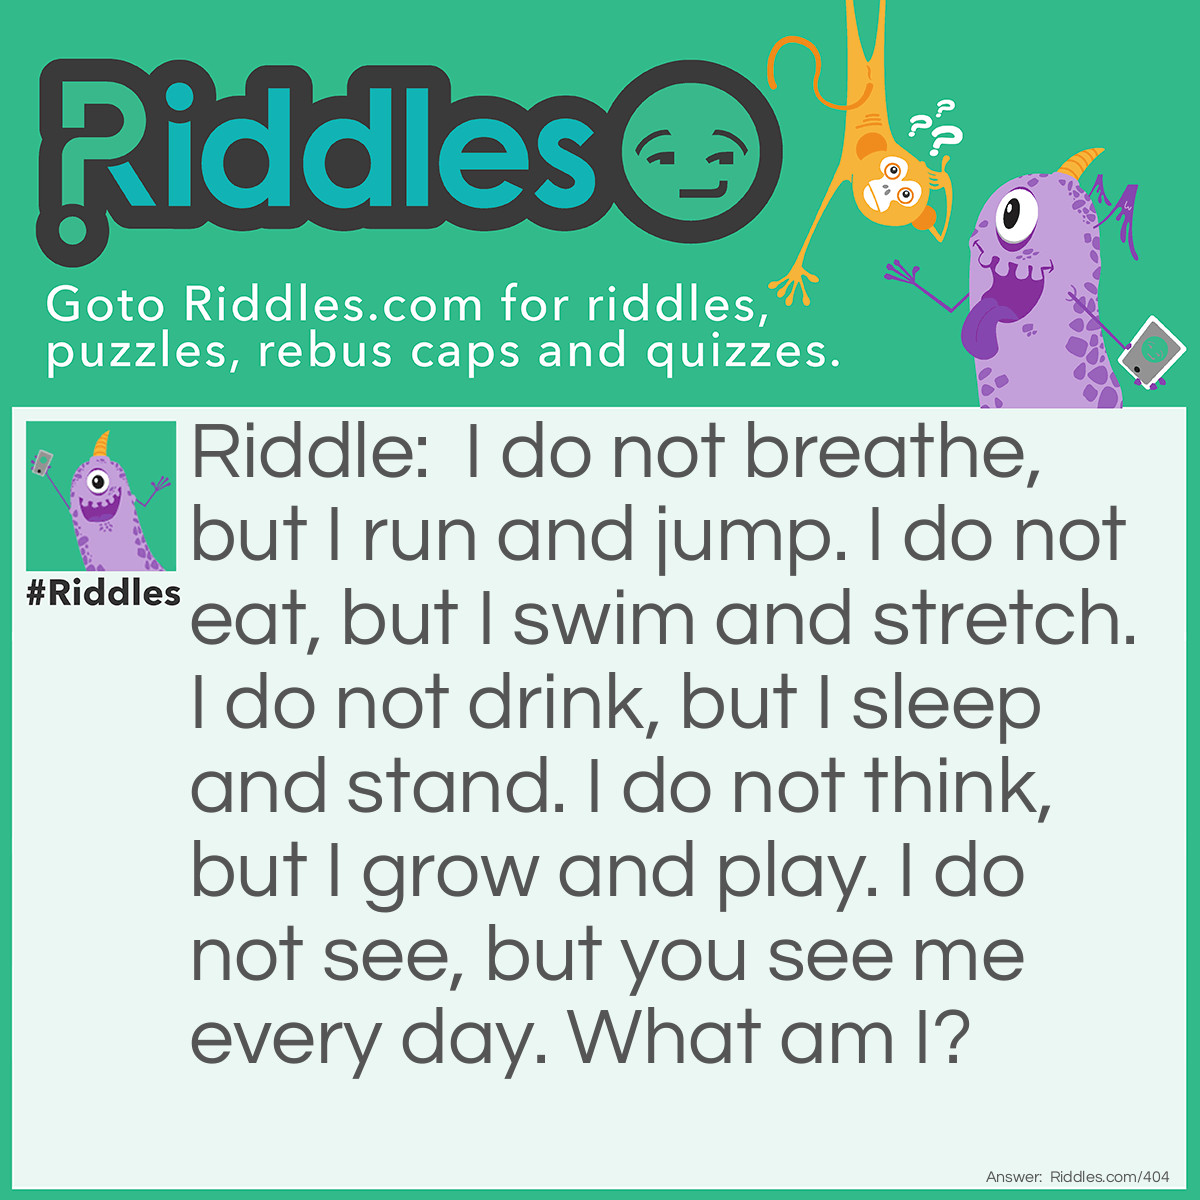 Riddle: I do not breathe, but I run and jump. I do not eat, but I swim and stretch. I do not drink, but I sleep and stand. I do not think, but I grow and play. I do not see, but you see me every day. What am I? Answer: I am a leg.